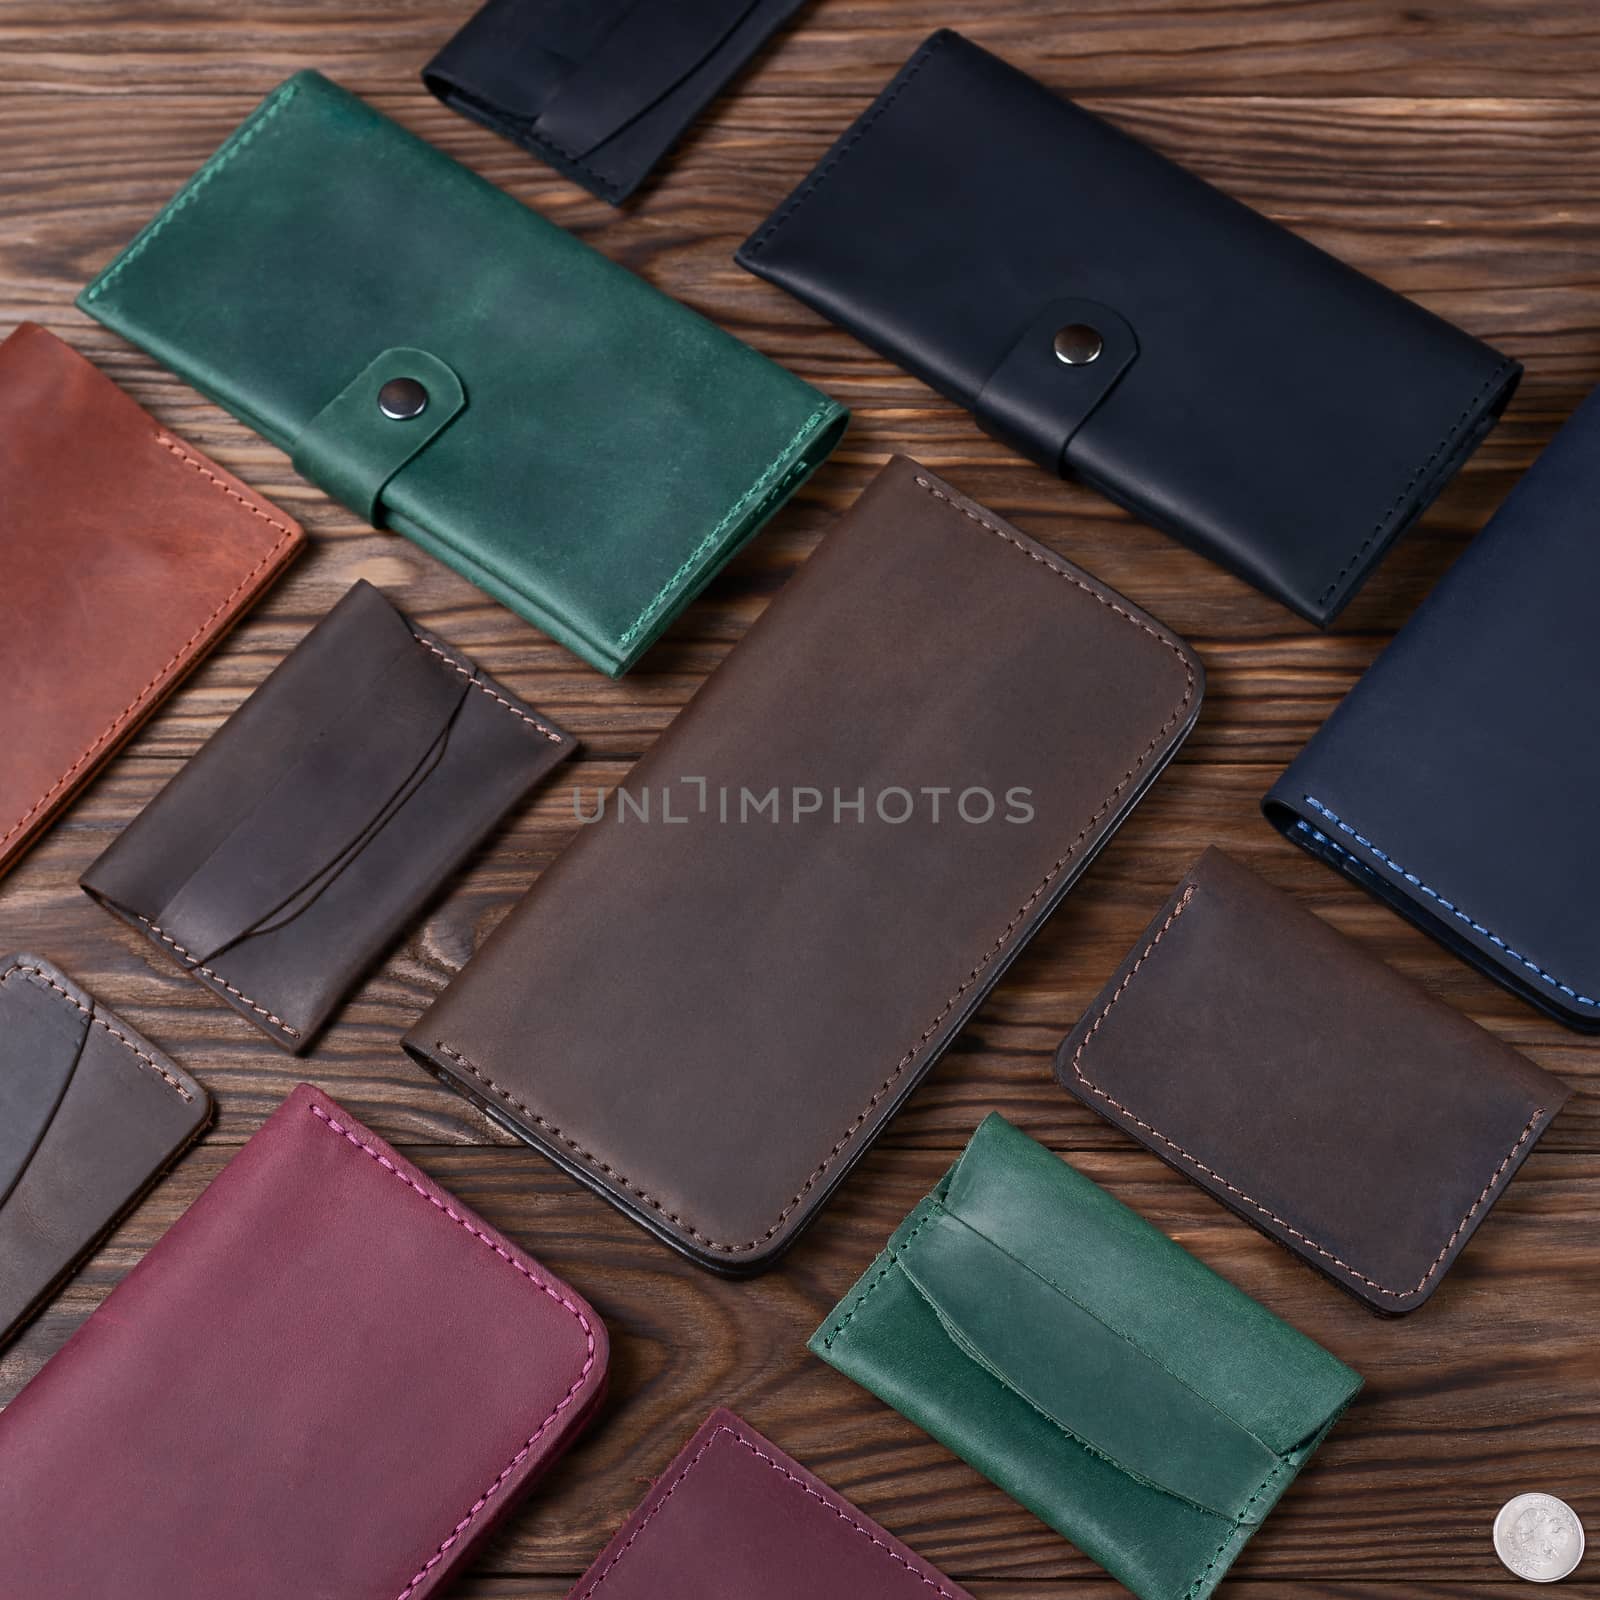 Brown color handmade leather porte-monnaie surrounded by other leather accessories on wooden textured background.  Side view. Stock photo of luxury accessories. by alexsdriver